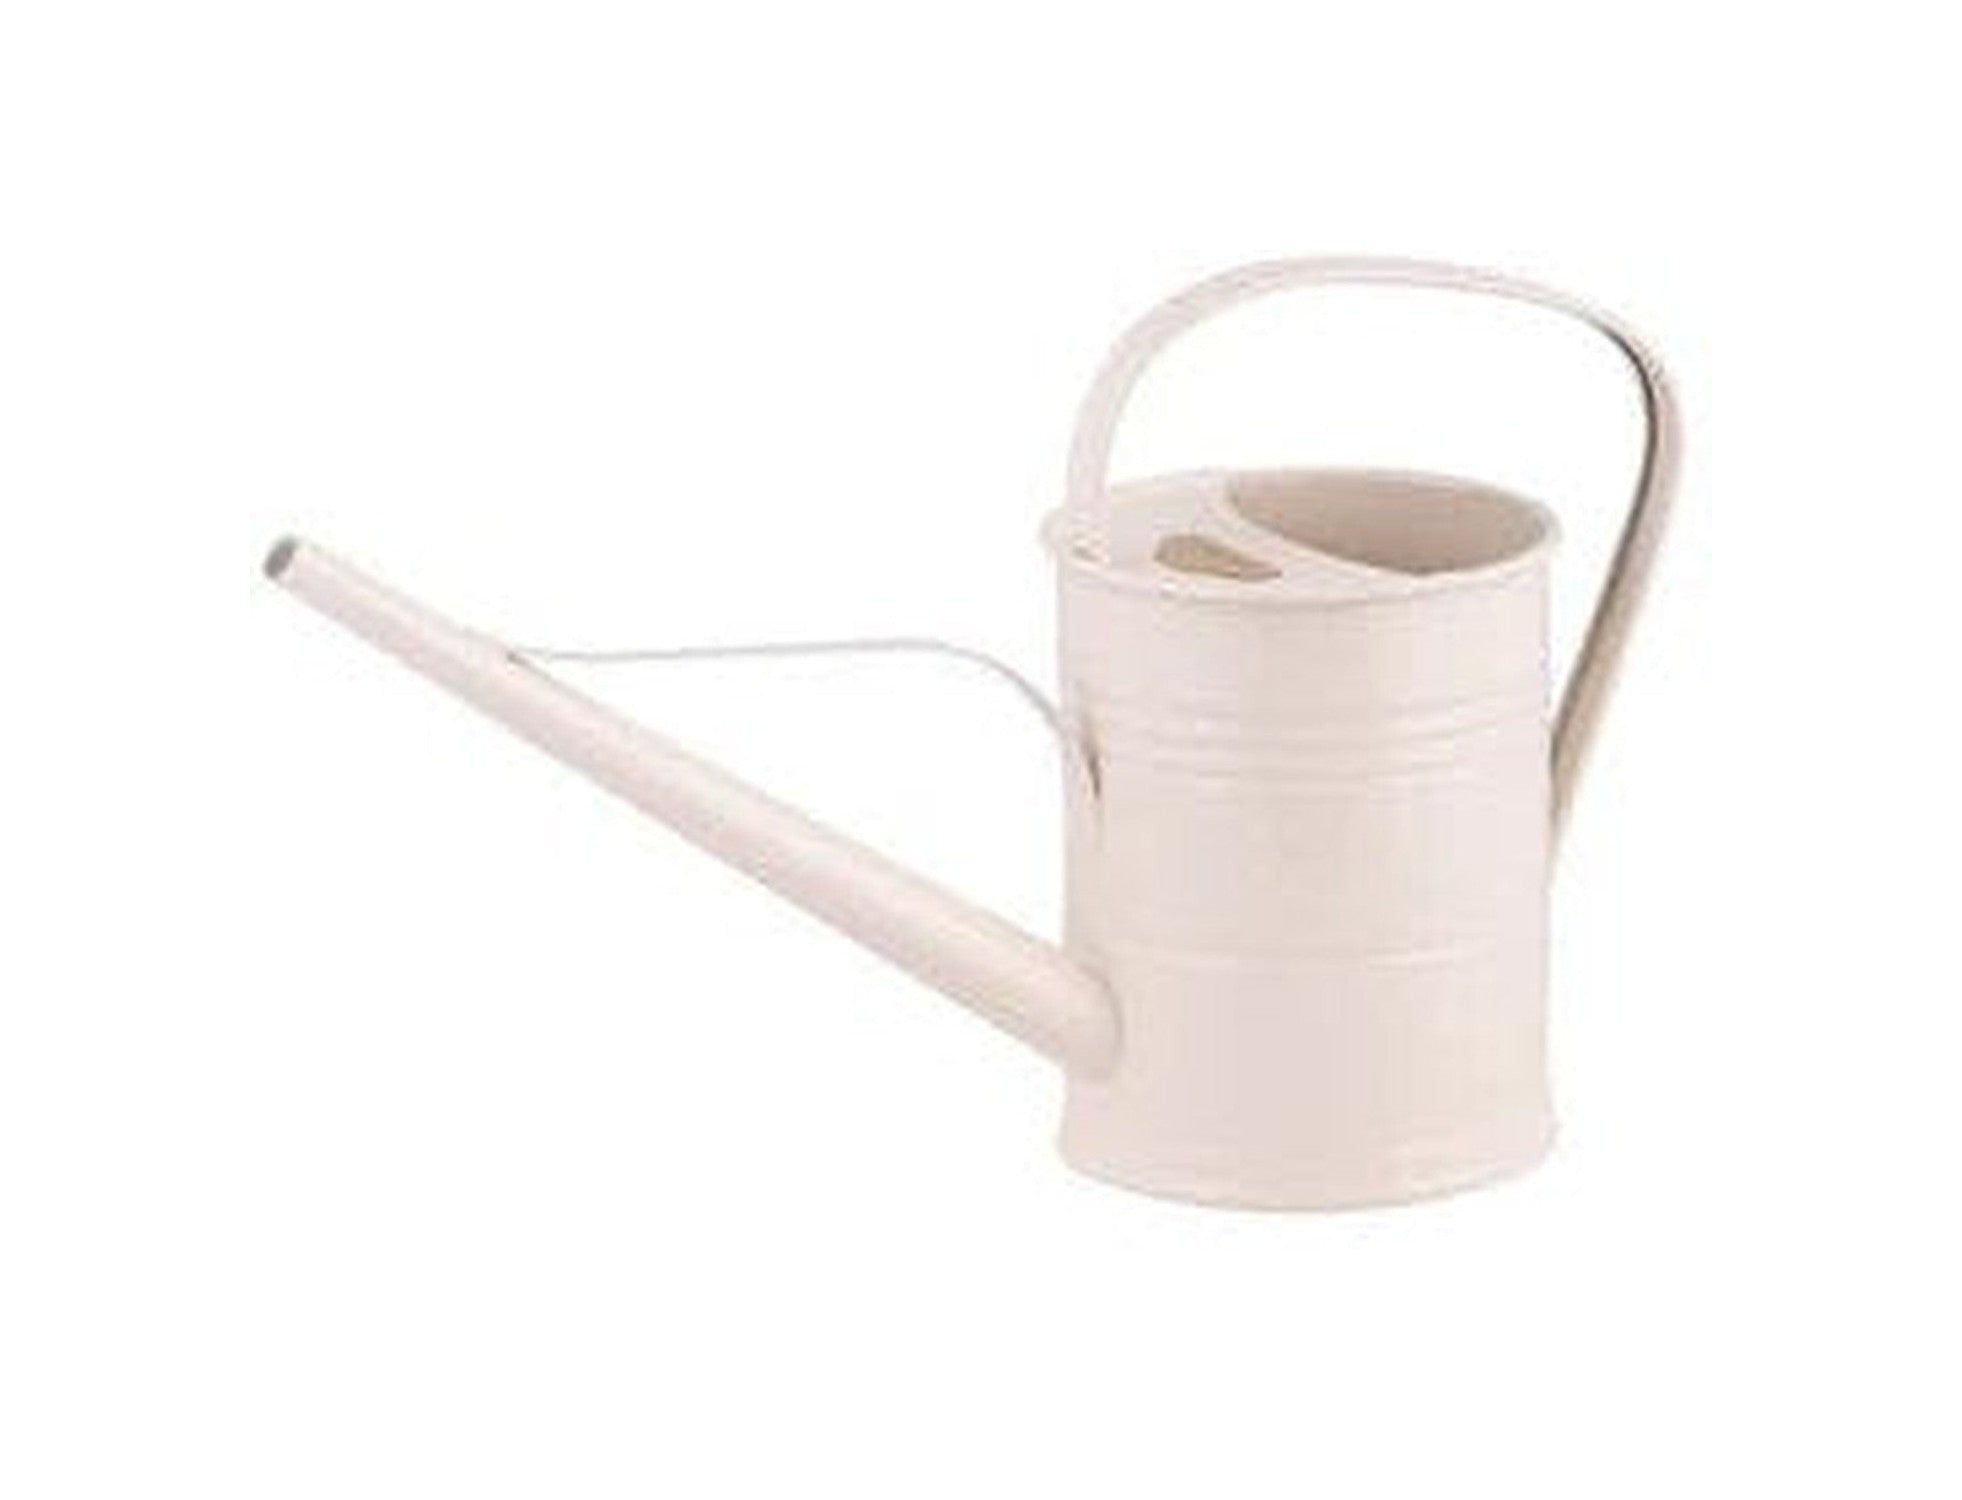 Watering can 1,5 liter